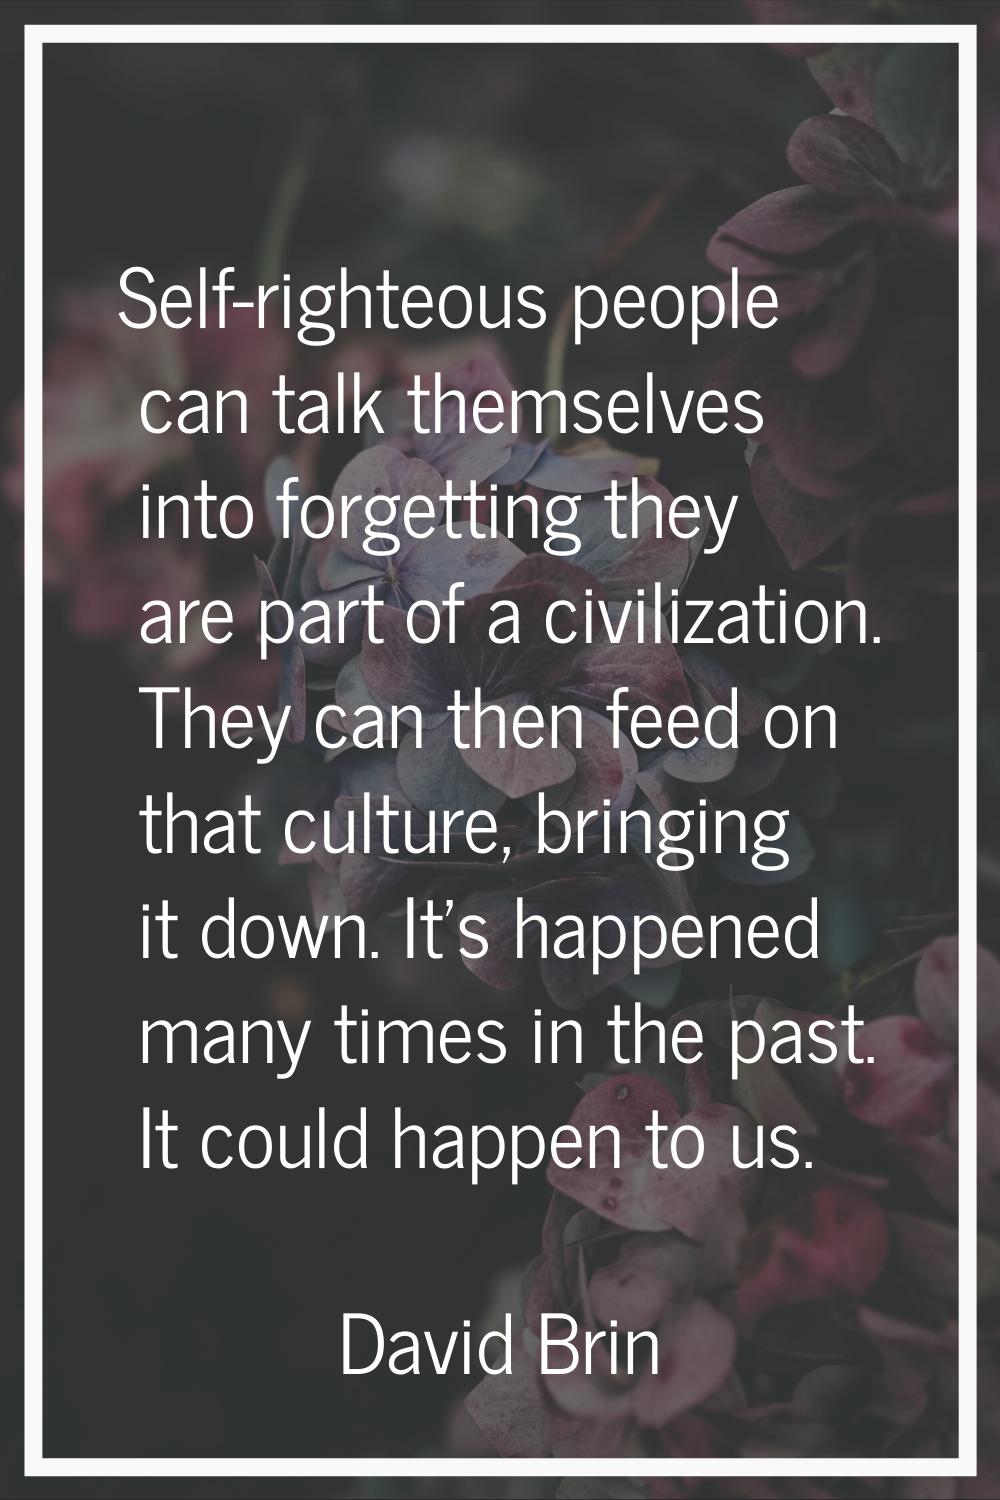 Self-righteous people can talk themselves into forgetting they are part of a civilization. They can